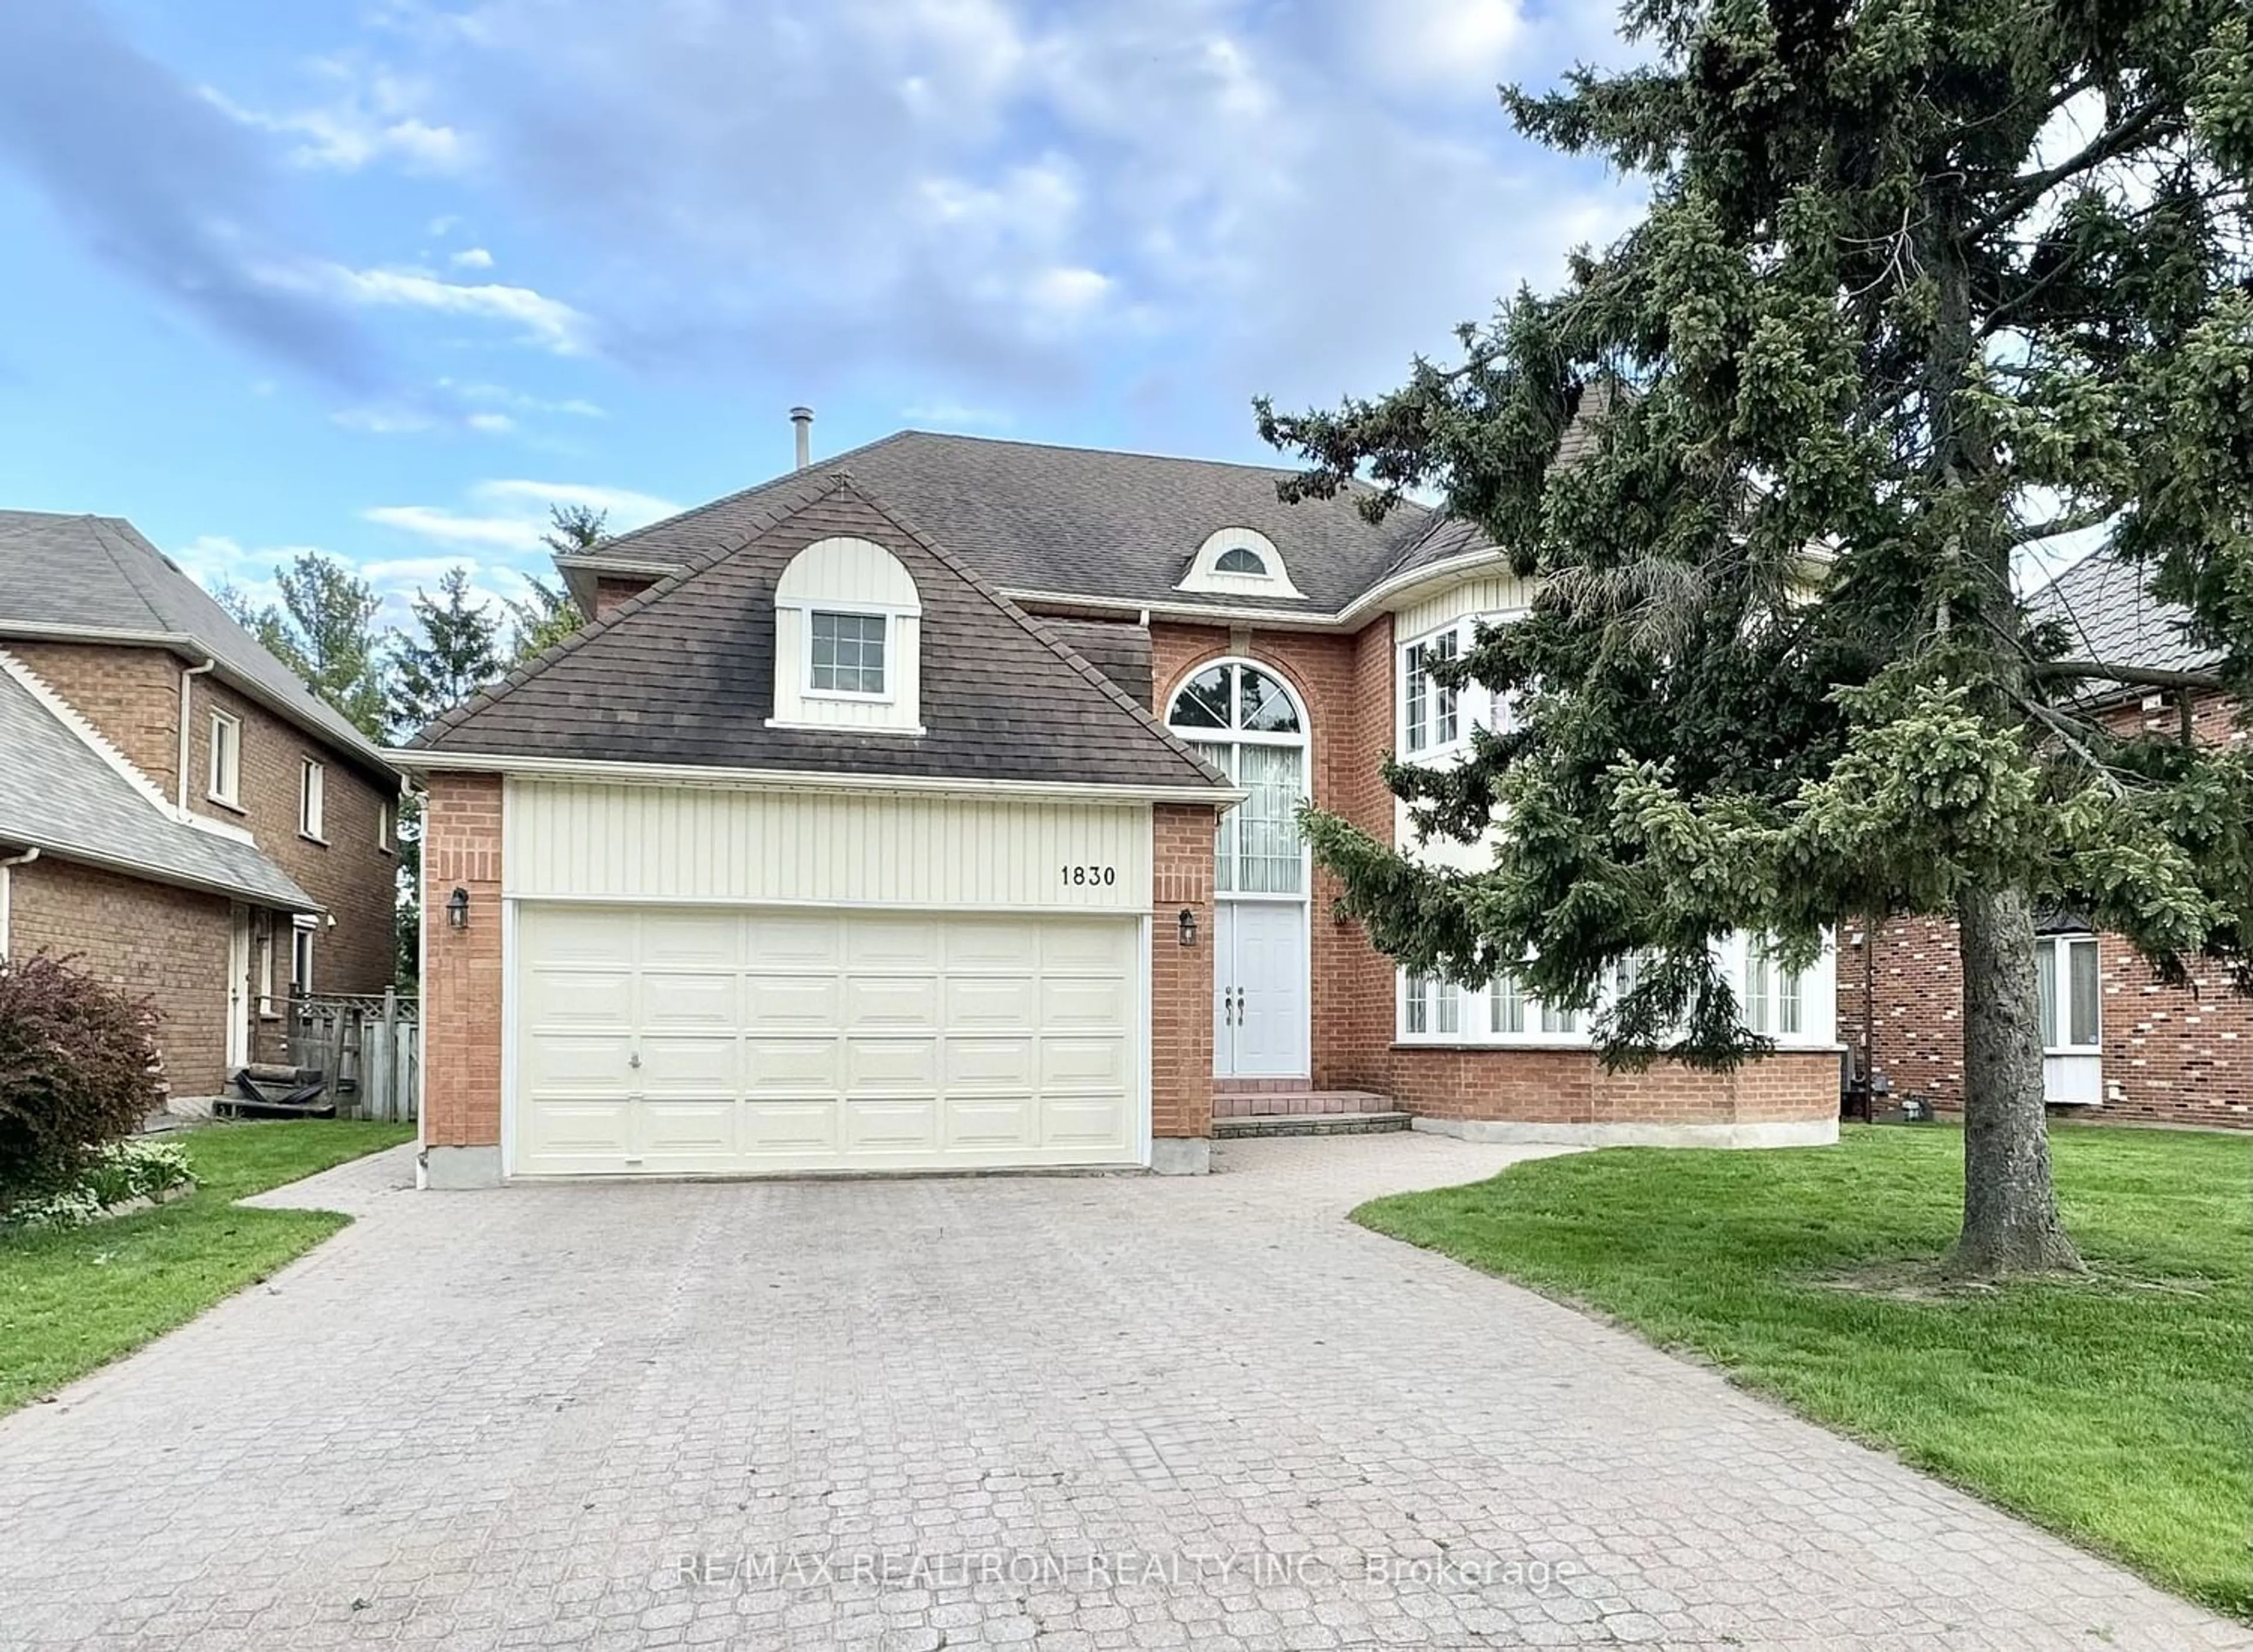 Home with brick exterior material for 1830 Sevenoaks Dr, Mississauga Ontario L5K 2N5